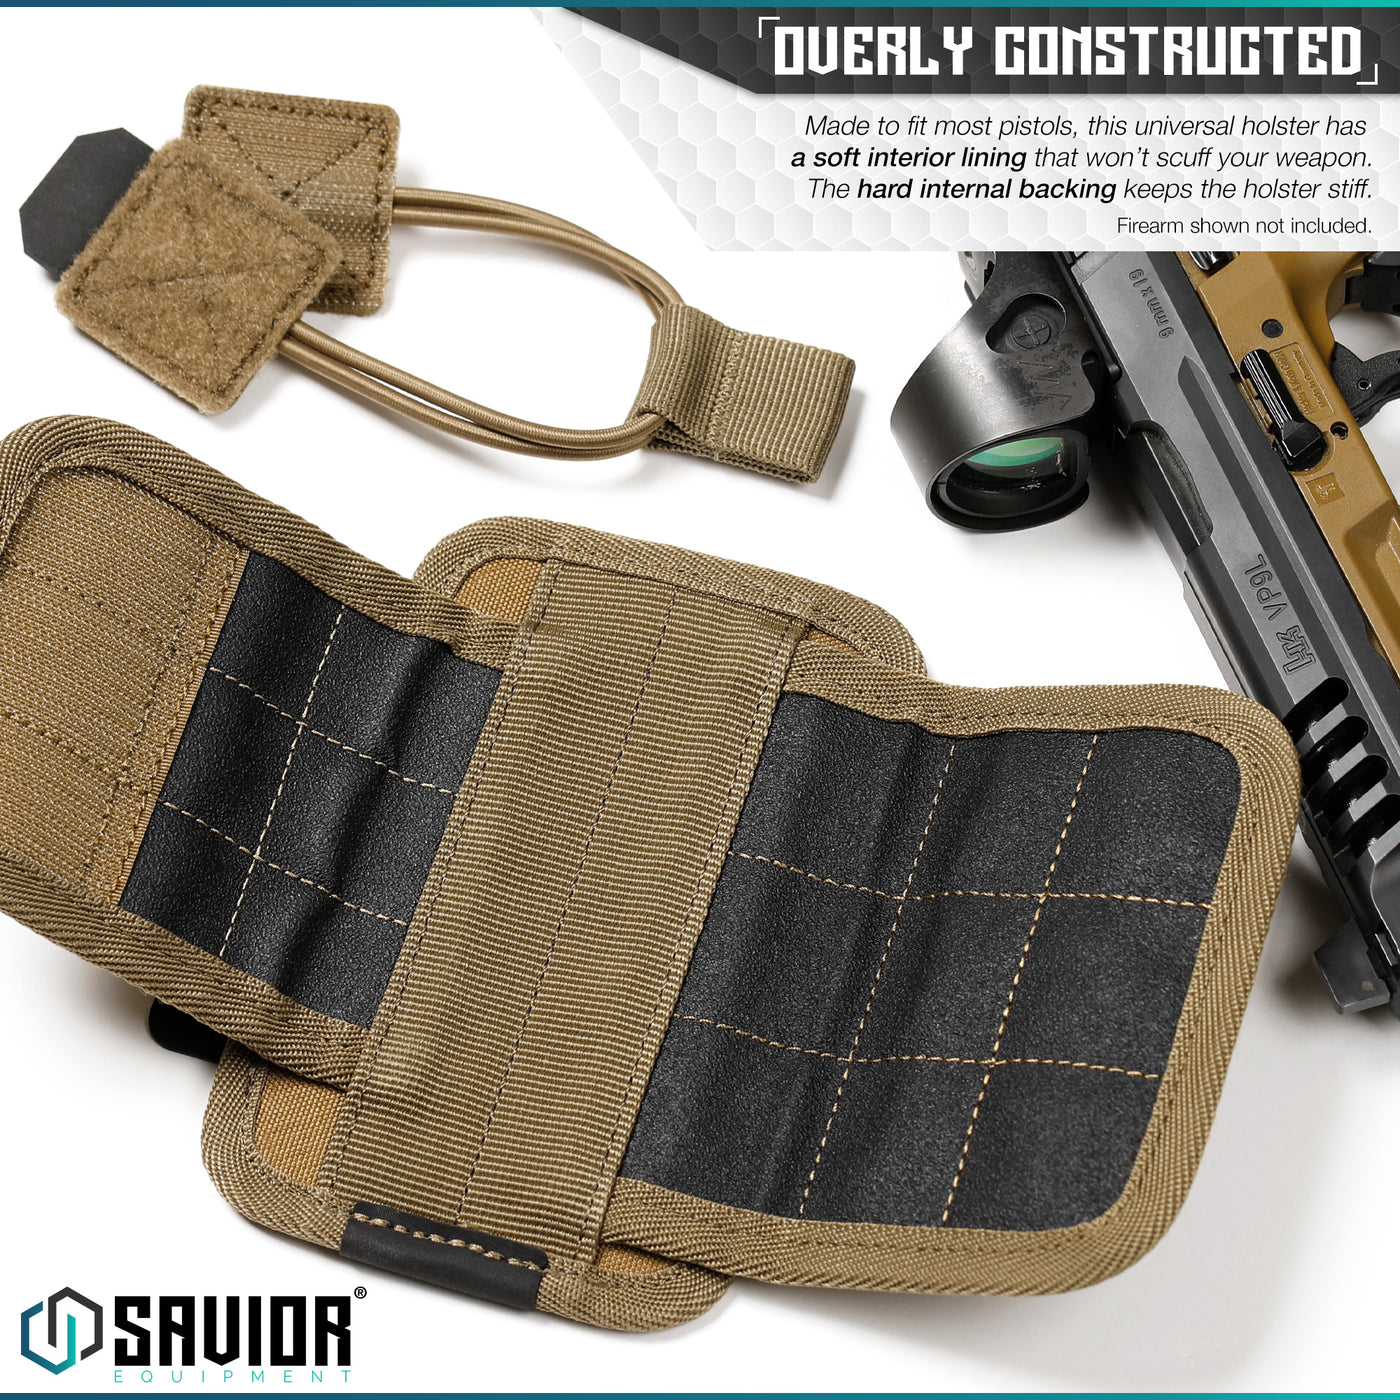 Overly Constructed - Made to fit most pistols, this universal holster has a soft interior lining so it won’t scuff your weapon. The hard internal backing keeps the holster stiff. Firearms shown not included.